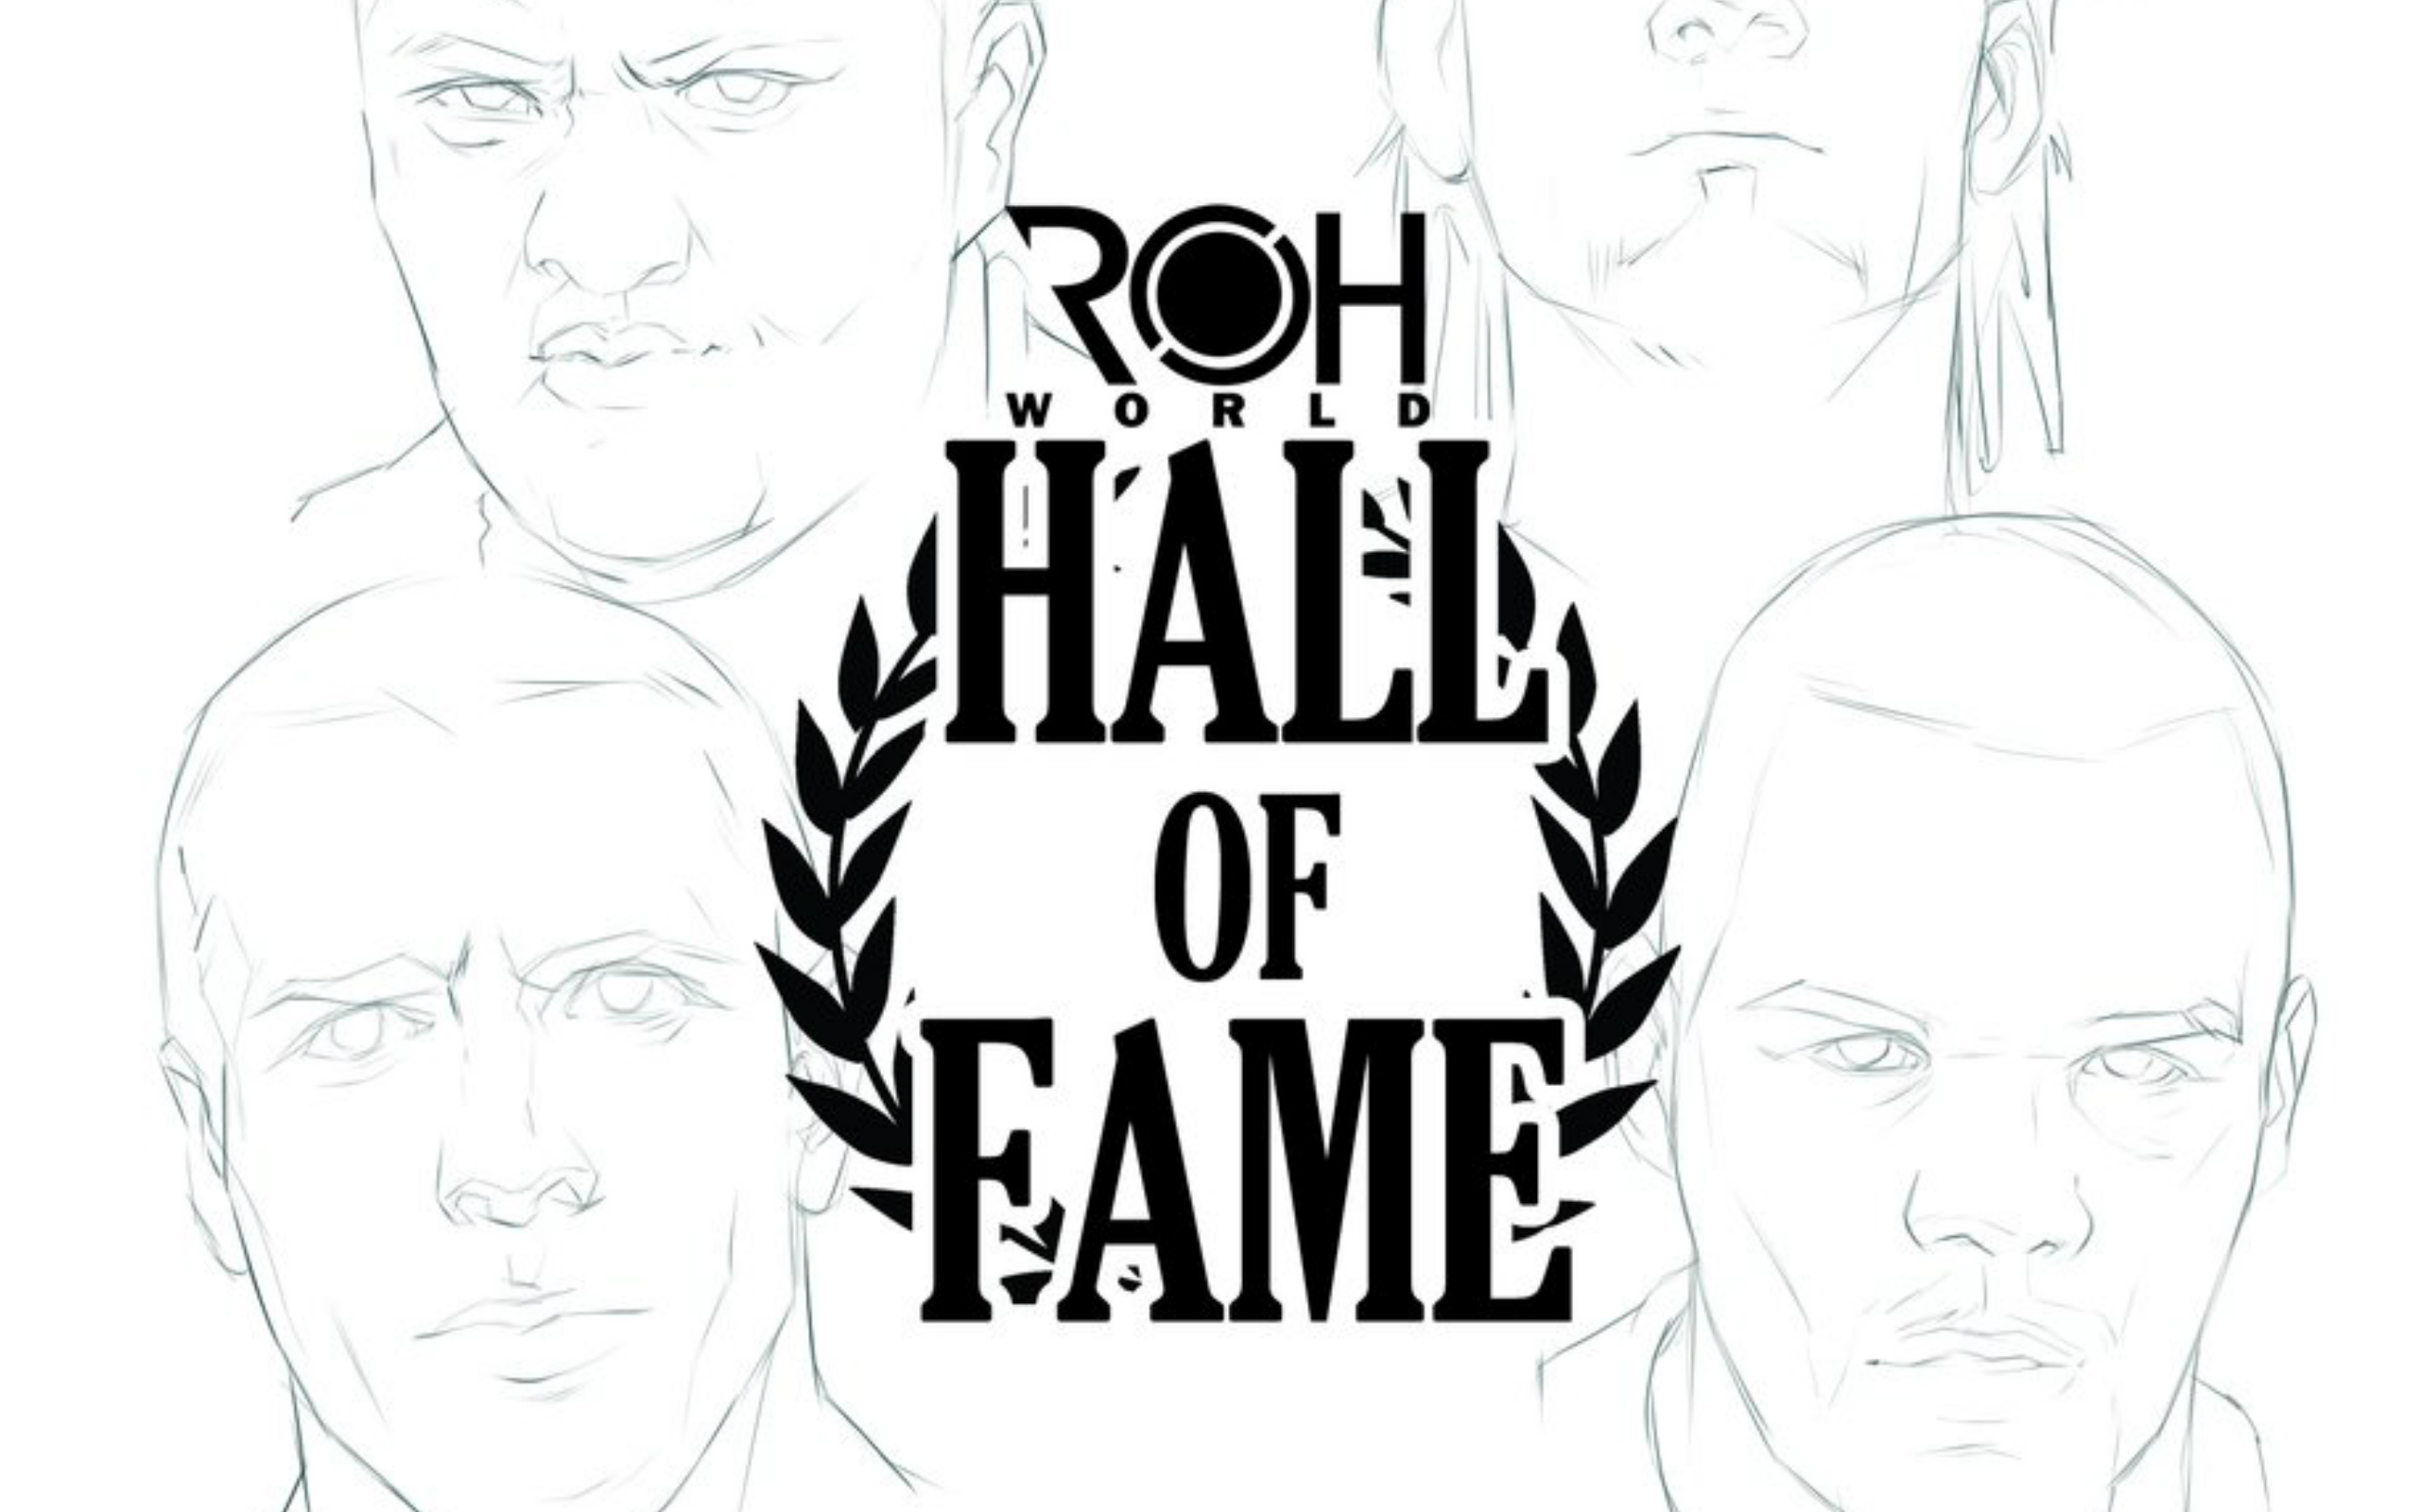 ROH COO Joe Koff Discusses Possibility of ROH Hall of Fame